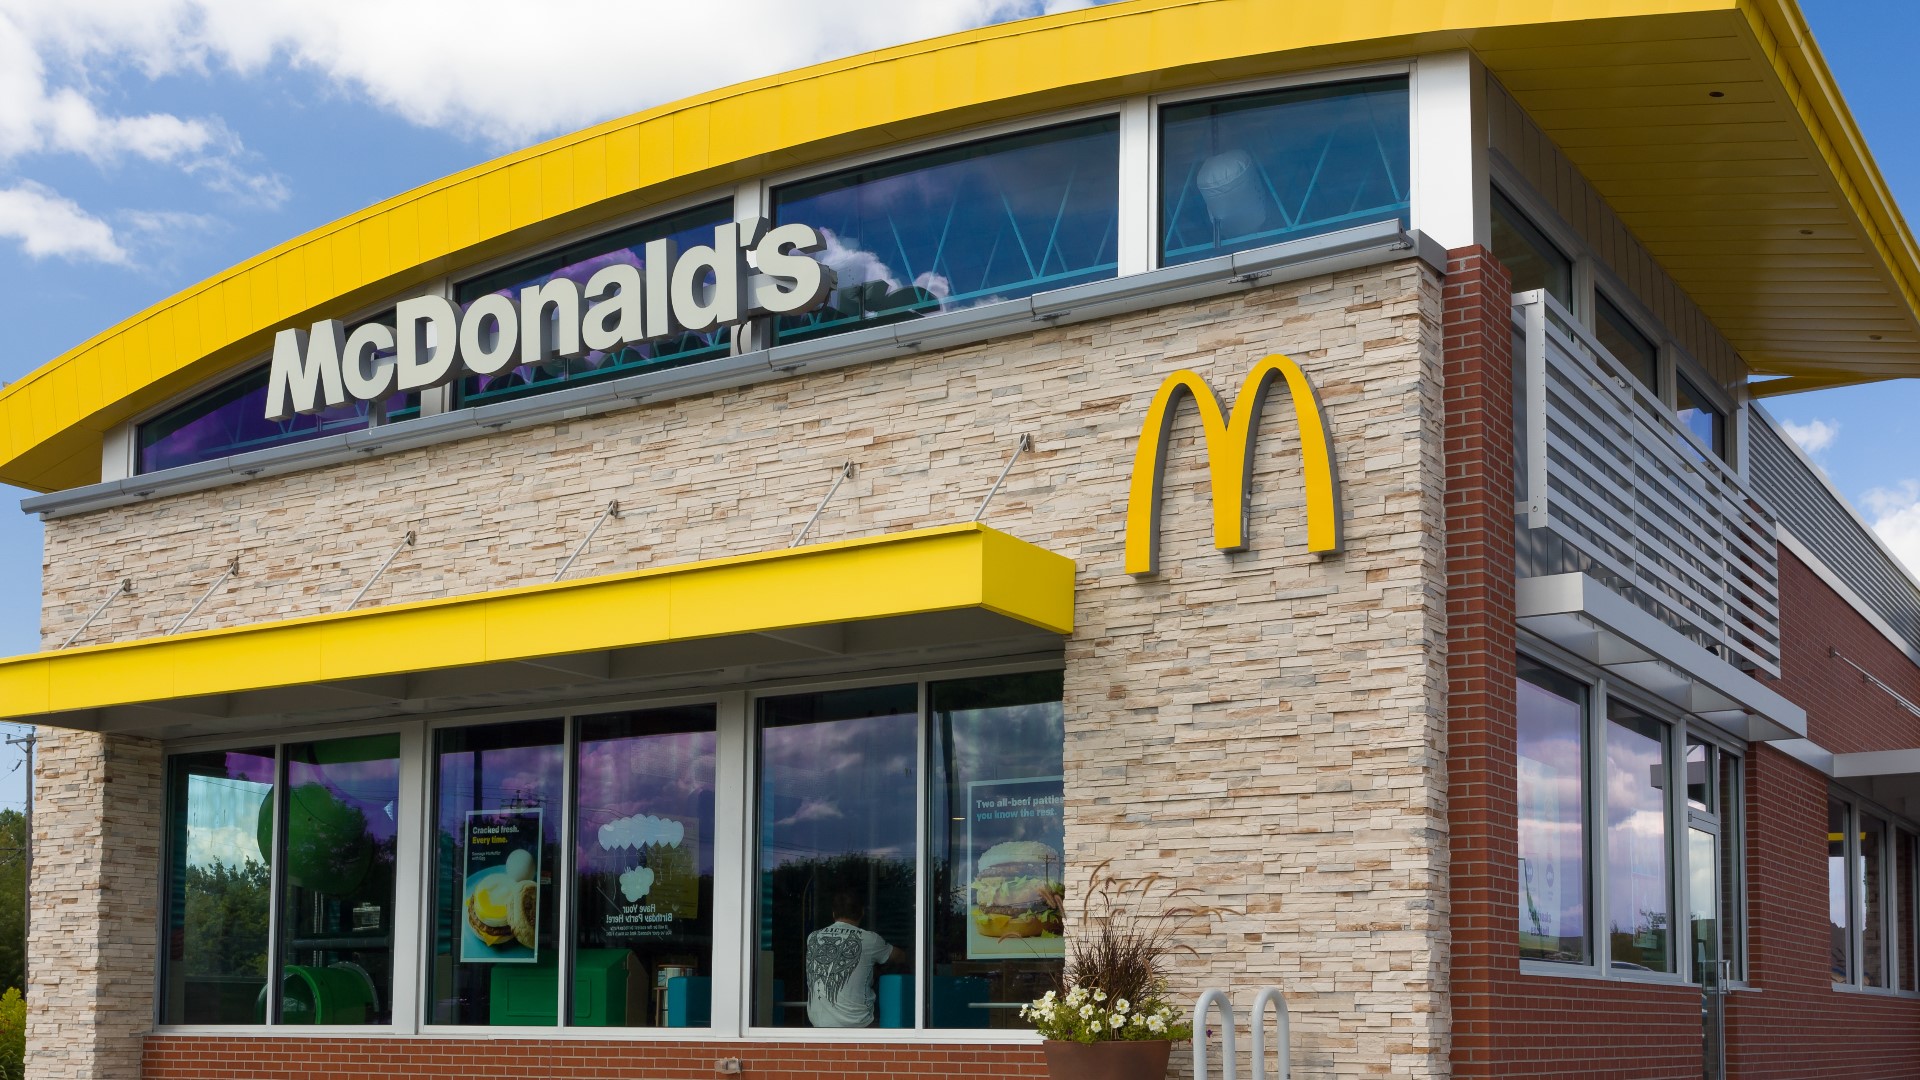 McDonald's says it wants to create consistency for customers and crewmembers.